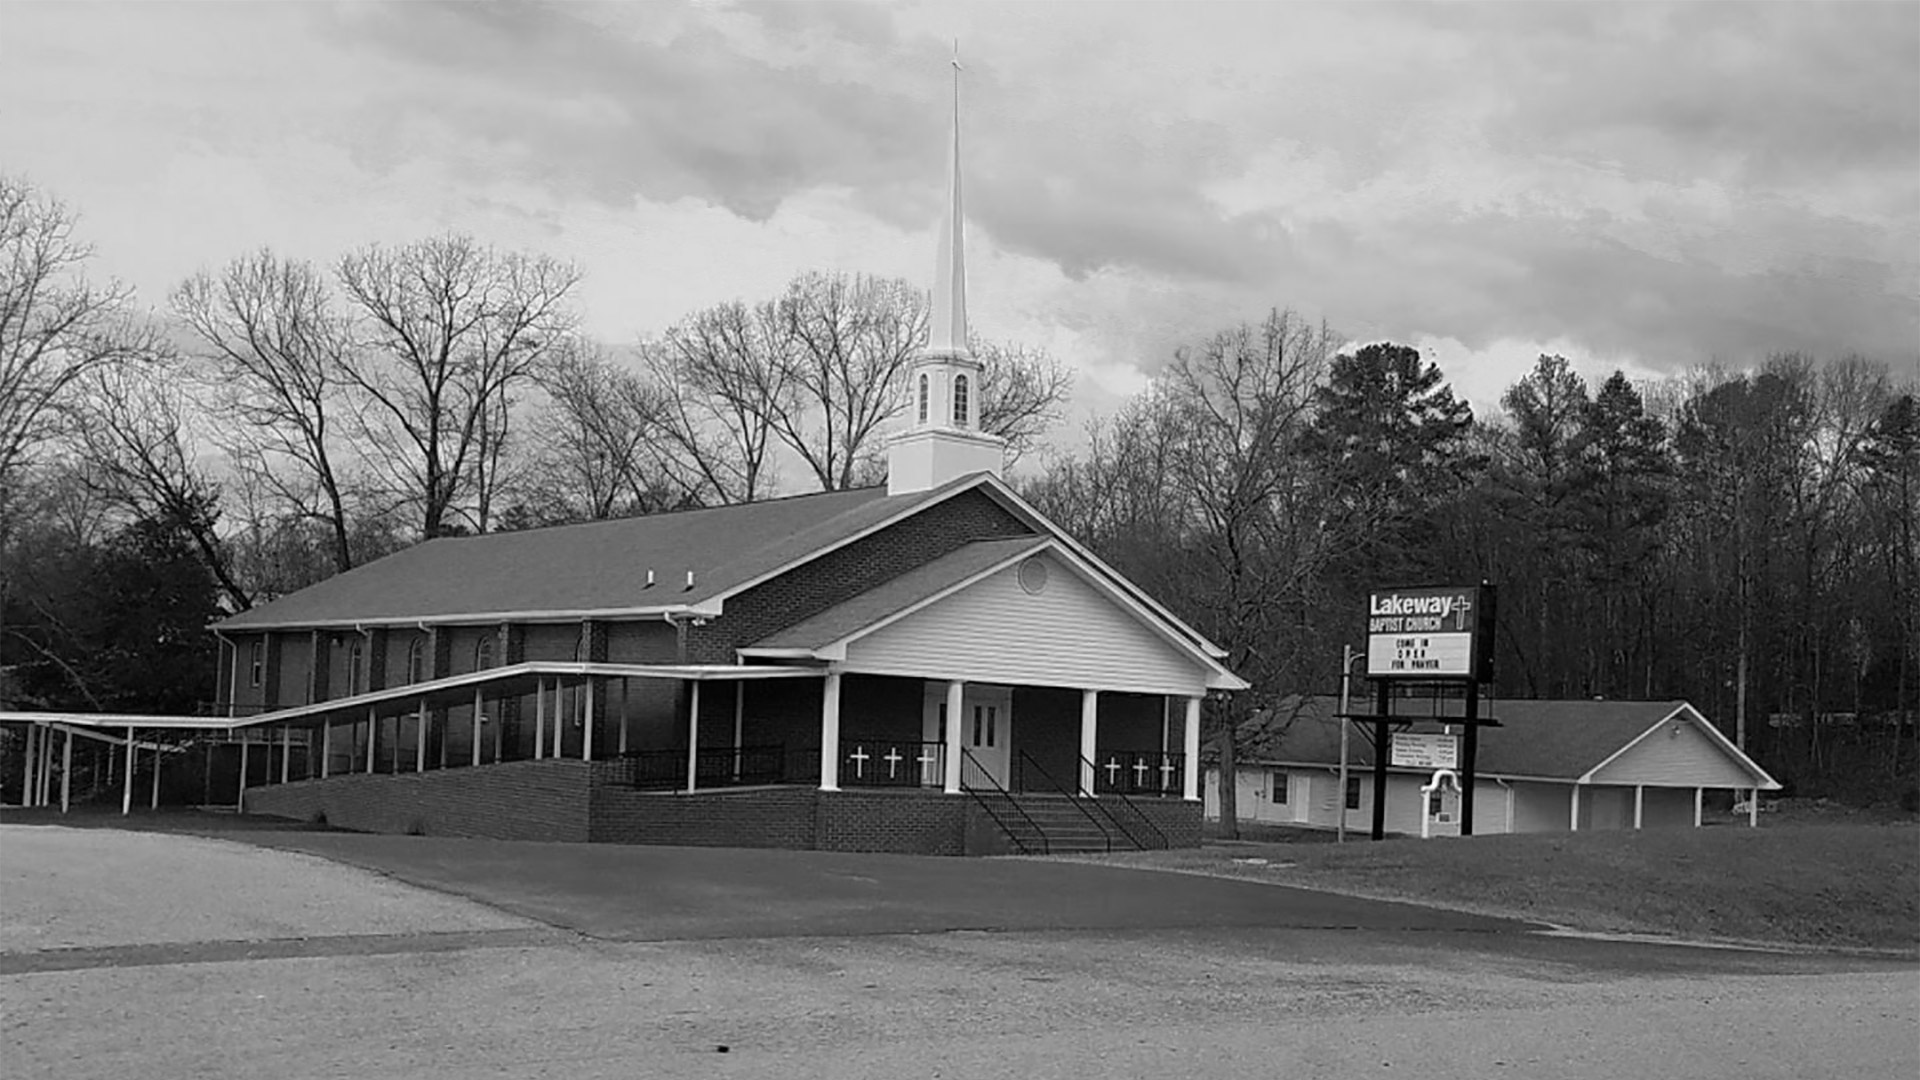 Exterior of Lakeway Baptist Church in black and white.